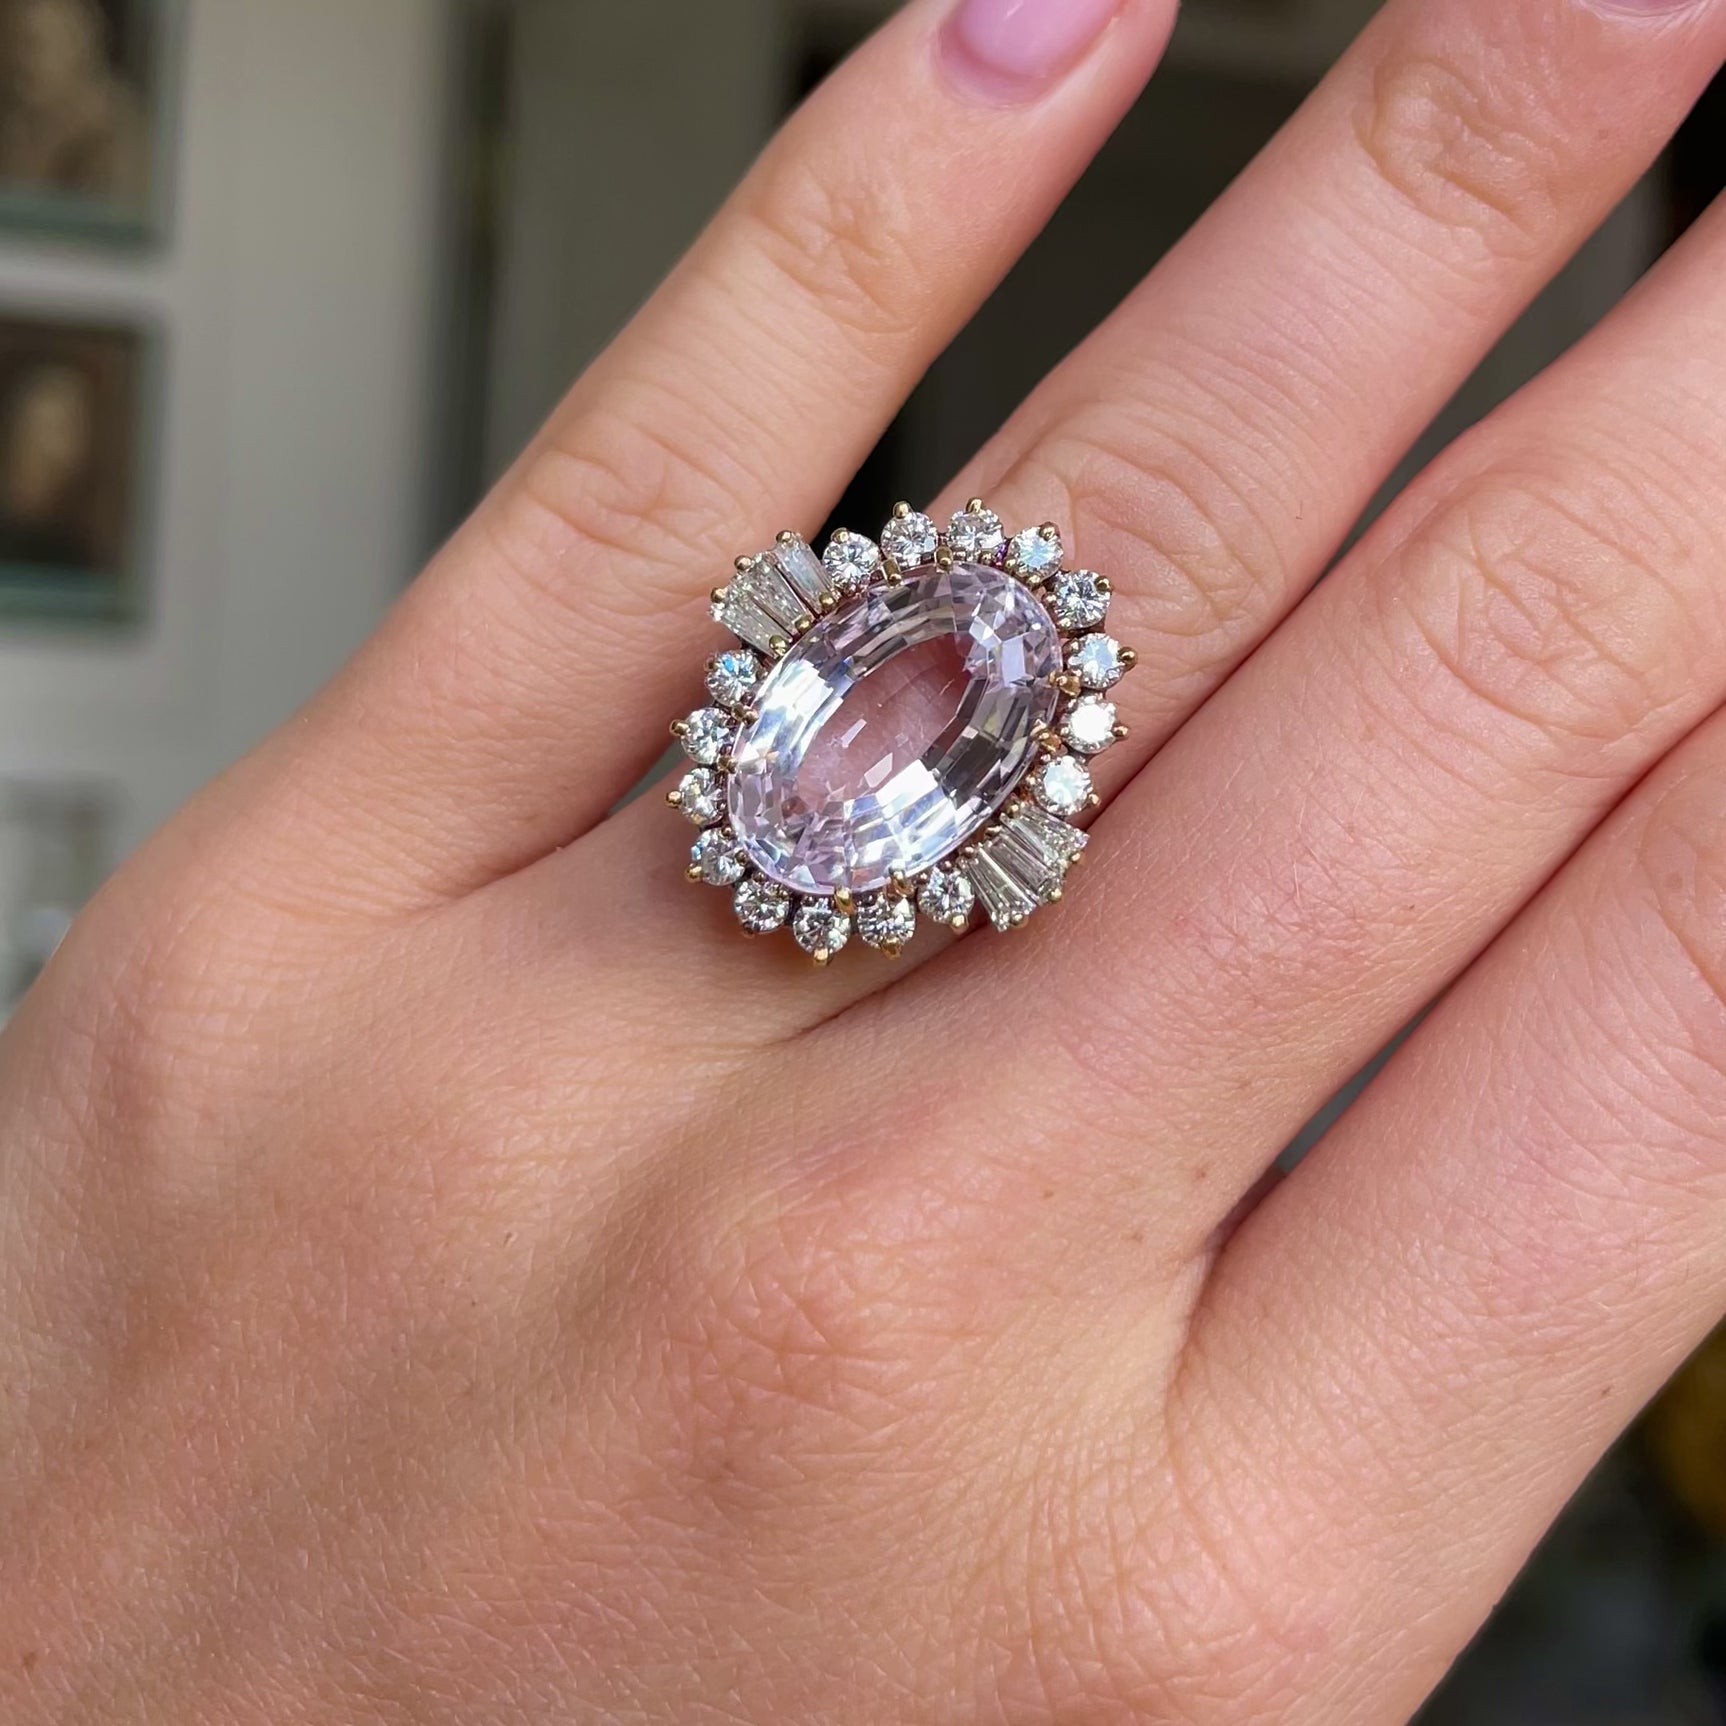 Morganite and diamond cluster cocktail ring,  worn on hand and moved around to give perspective.